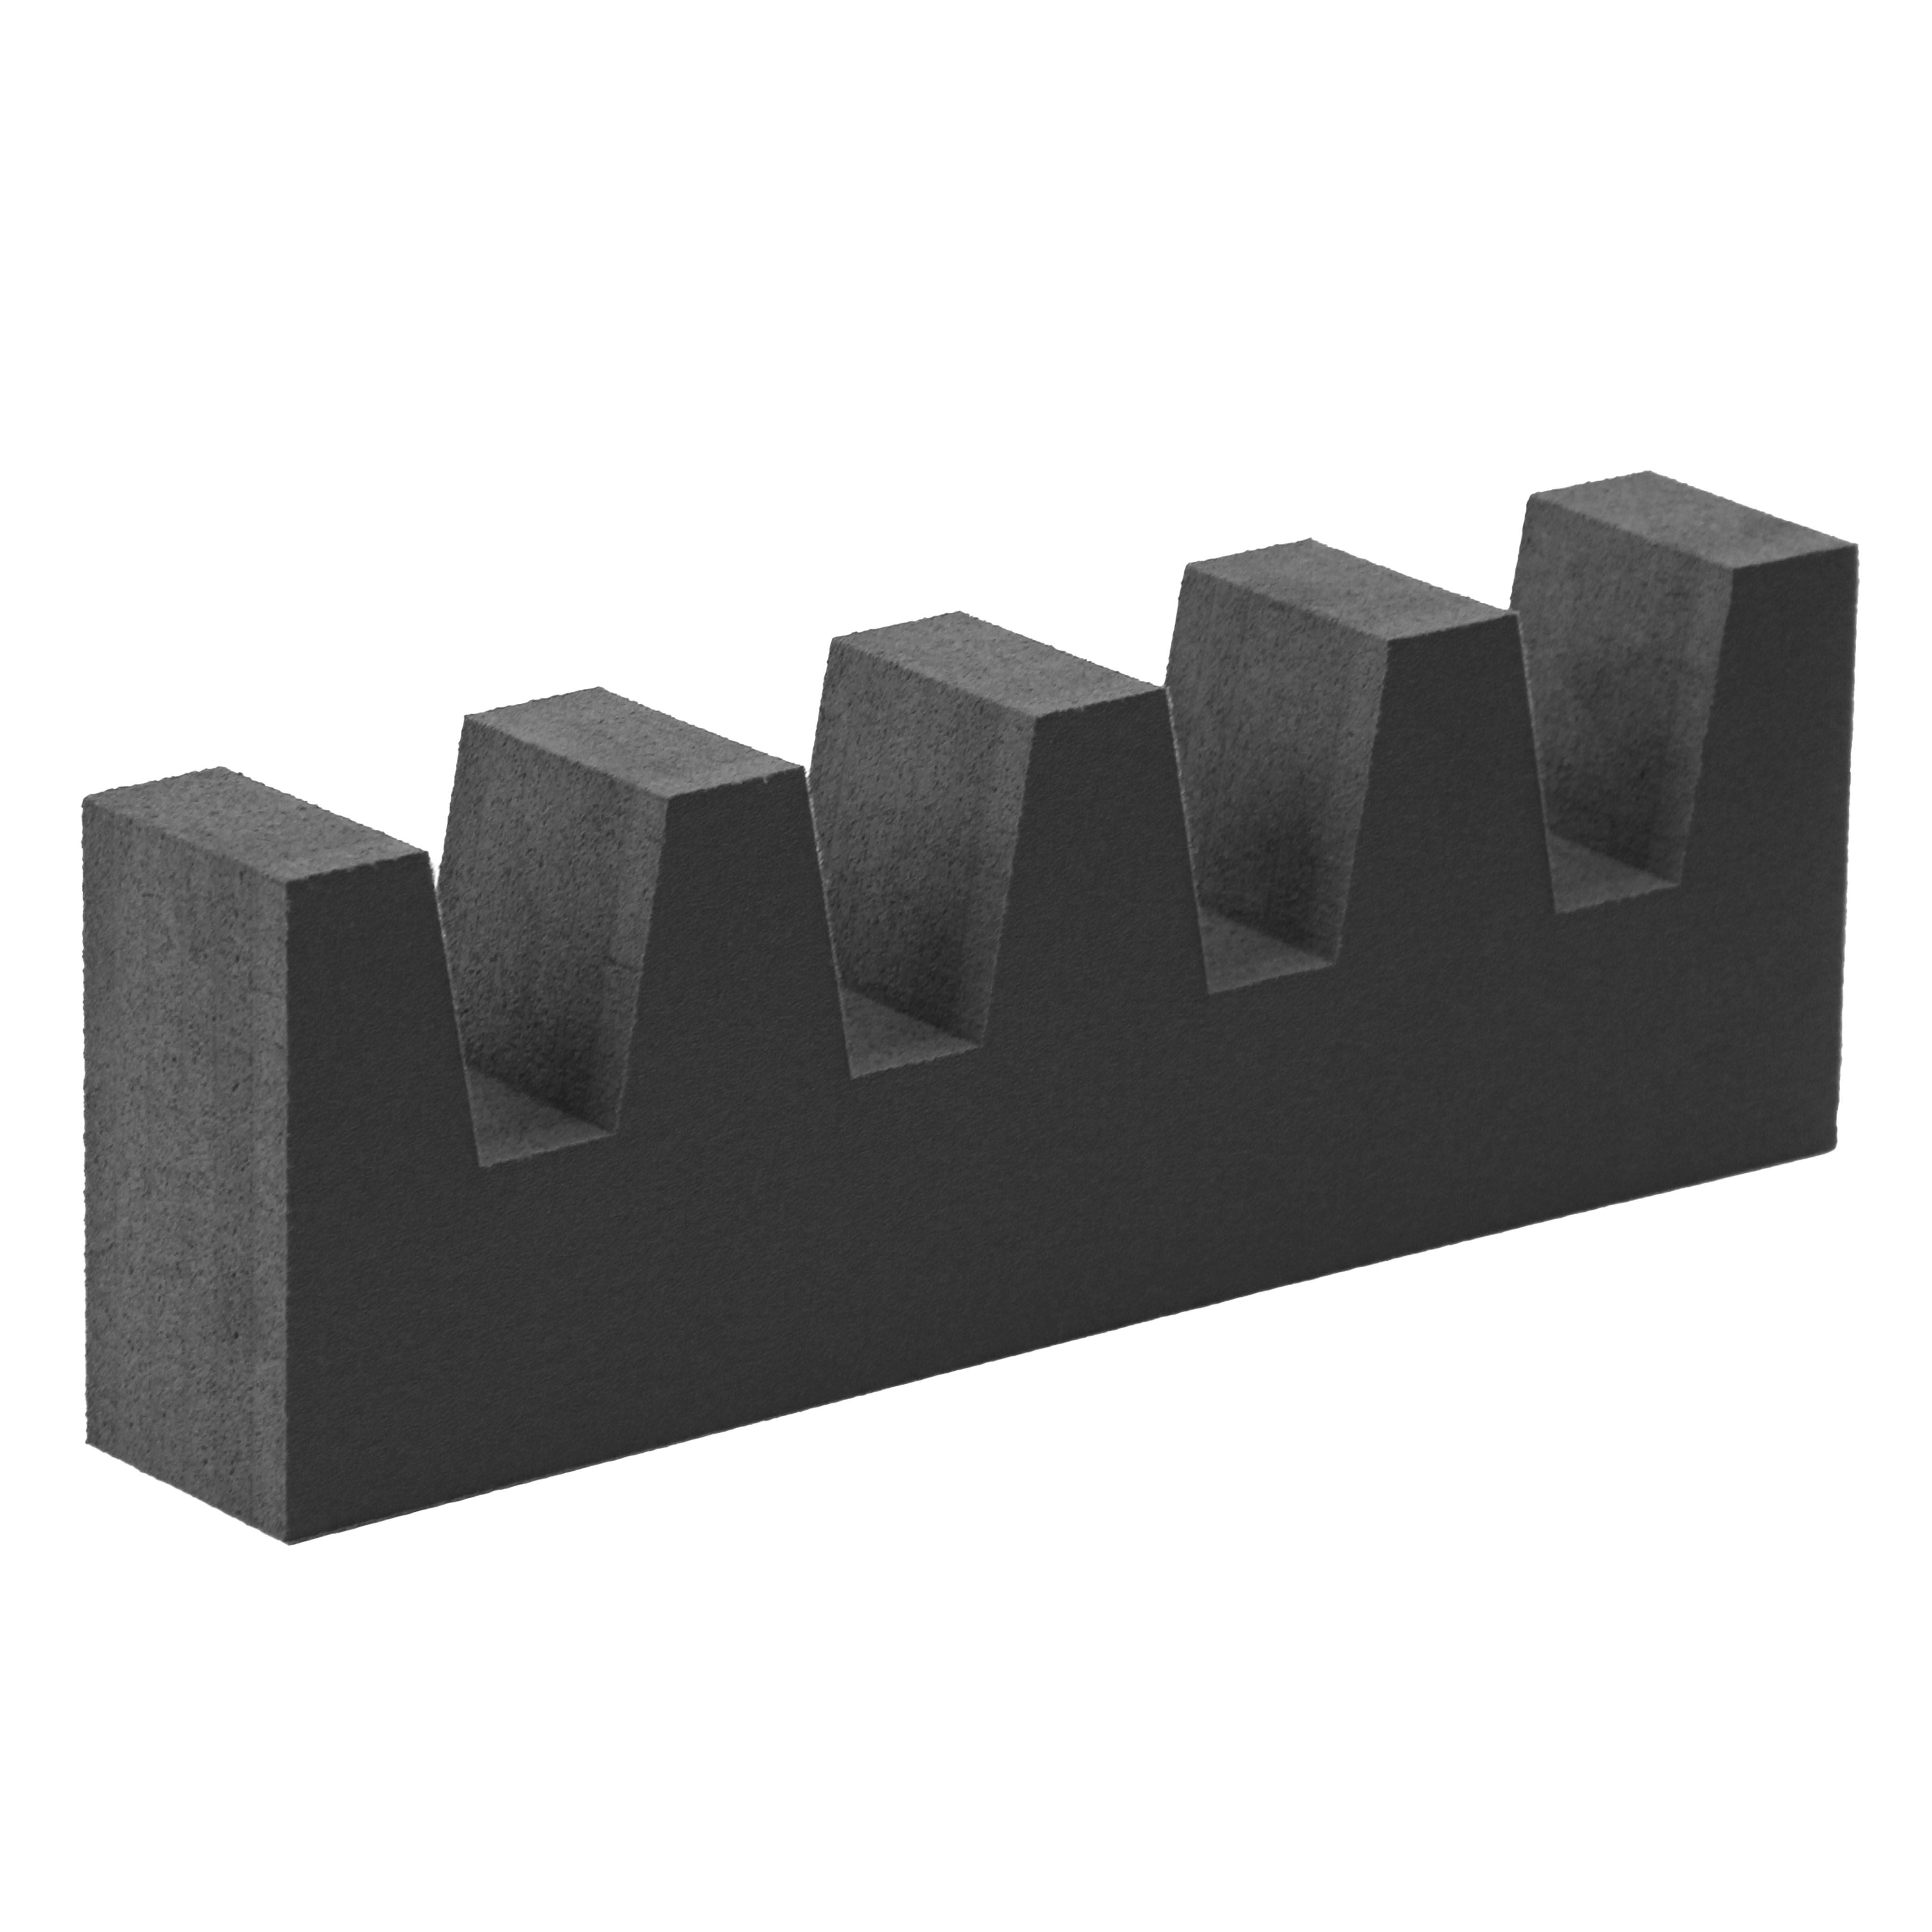 Heavy Duty Foam Dunnage Reusable Cushion for Shipping Box Crate Angled Groove 12x4x2 1 Pack